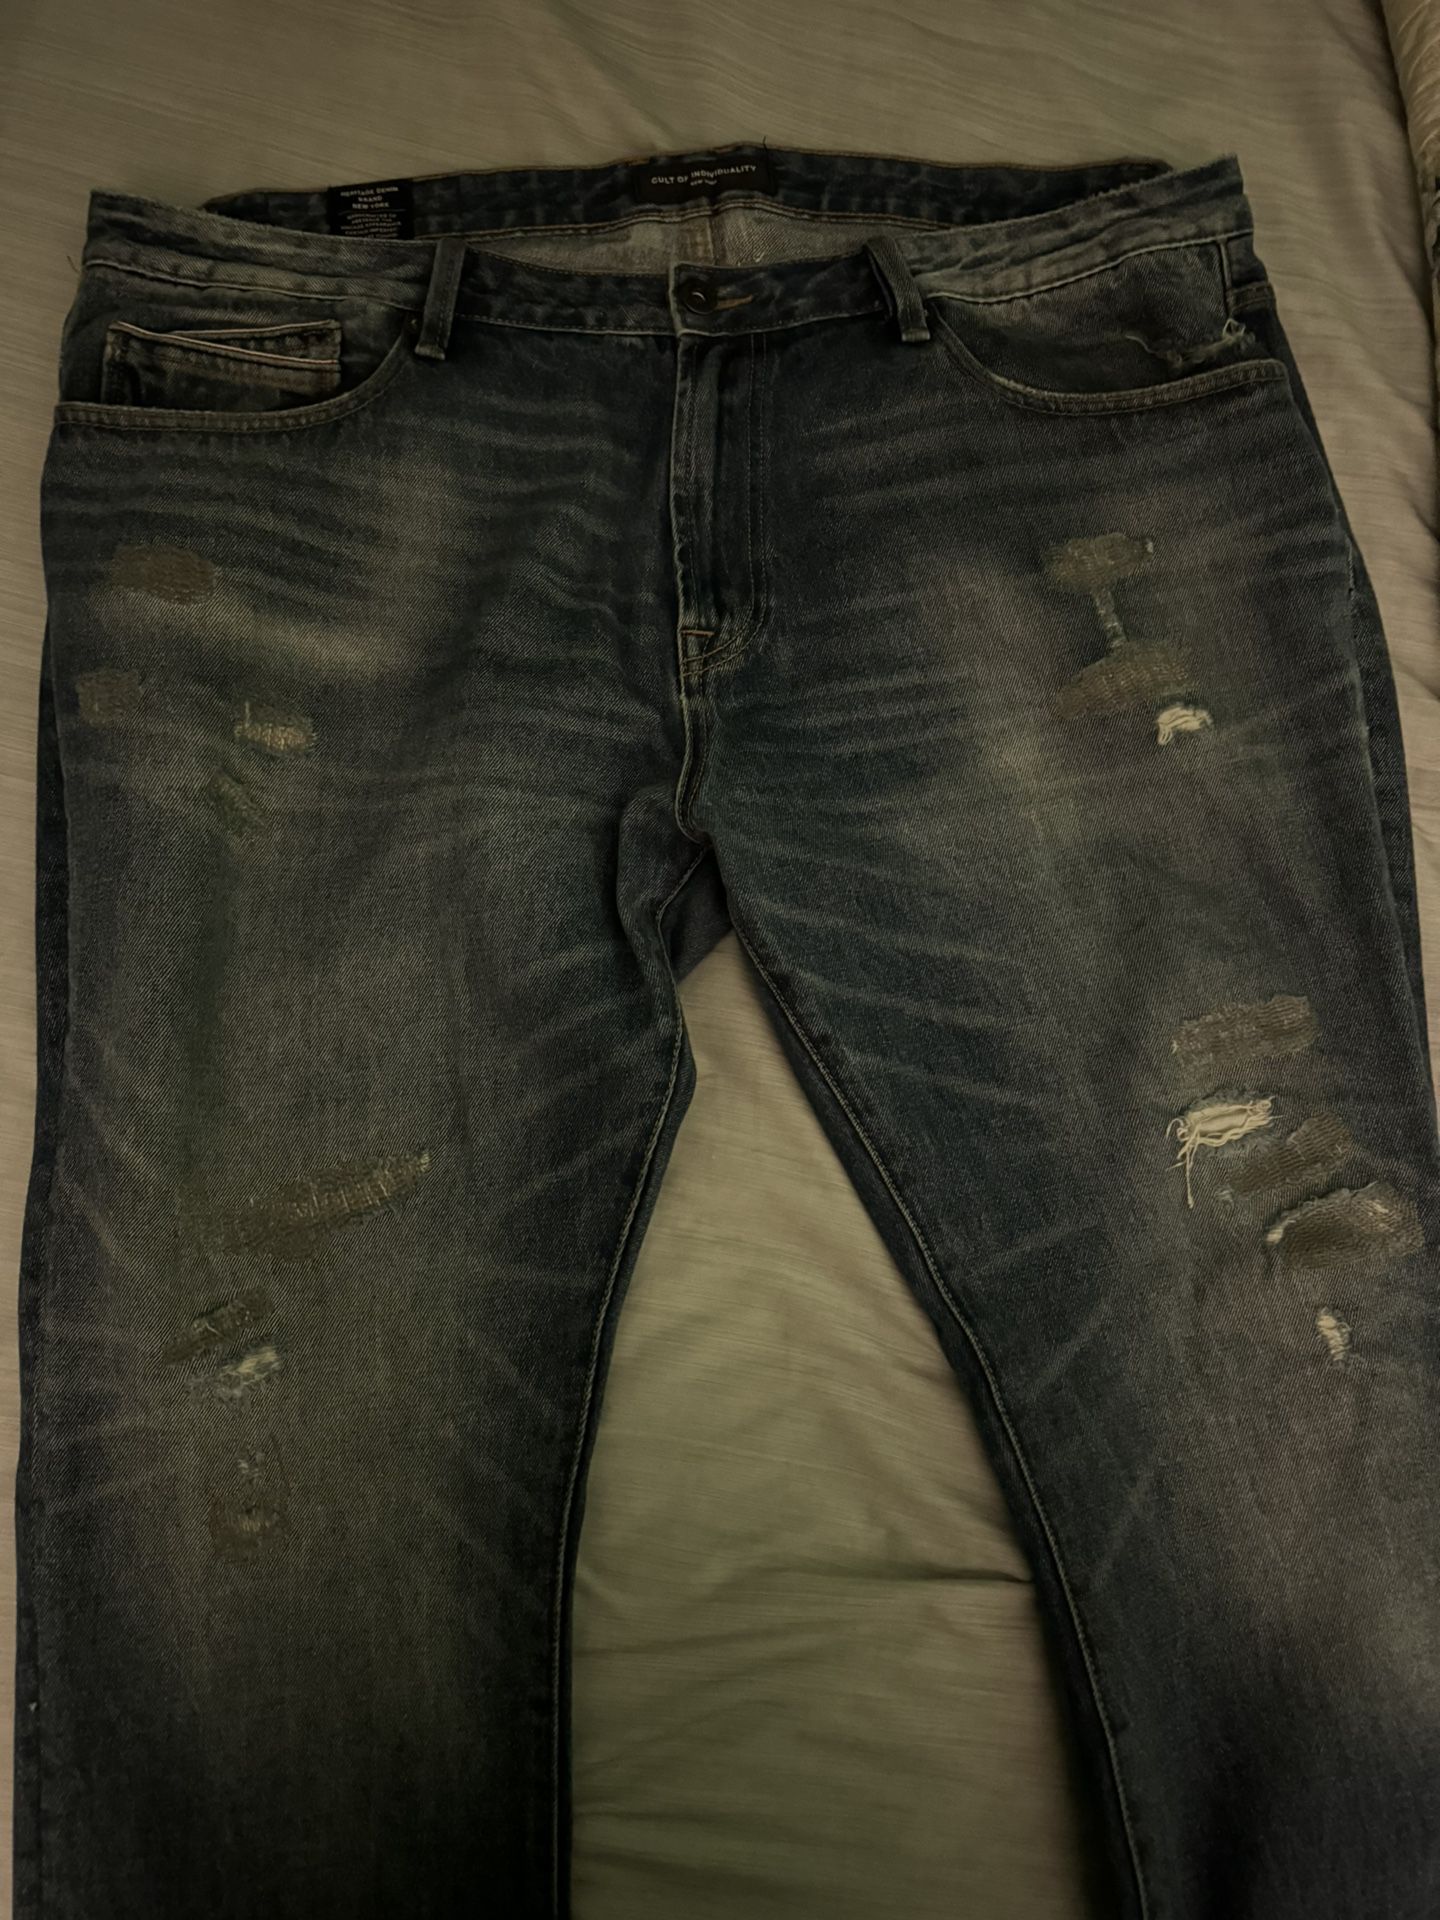 Cult Of Individuality High End Men’s Jeans Size 44